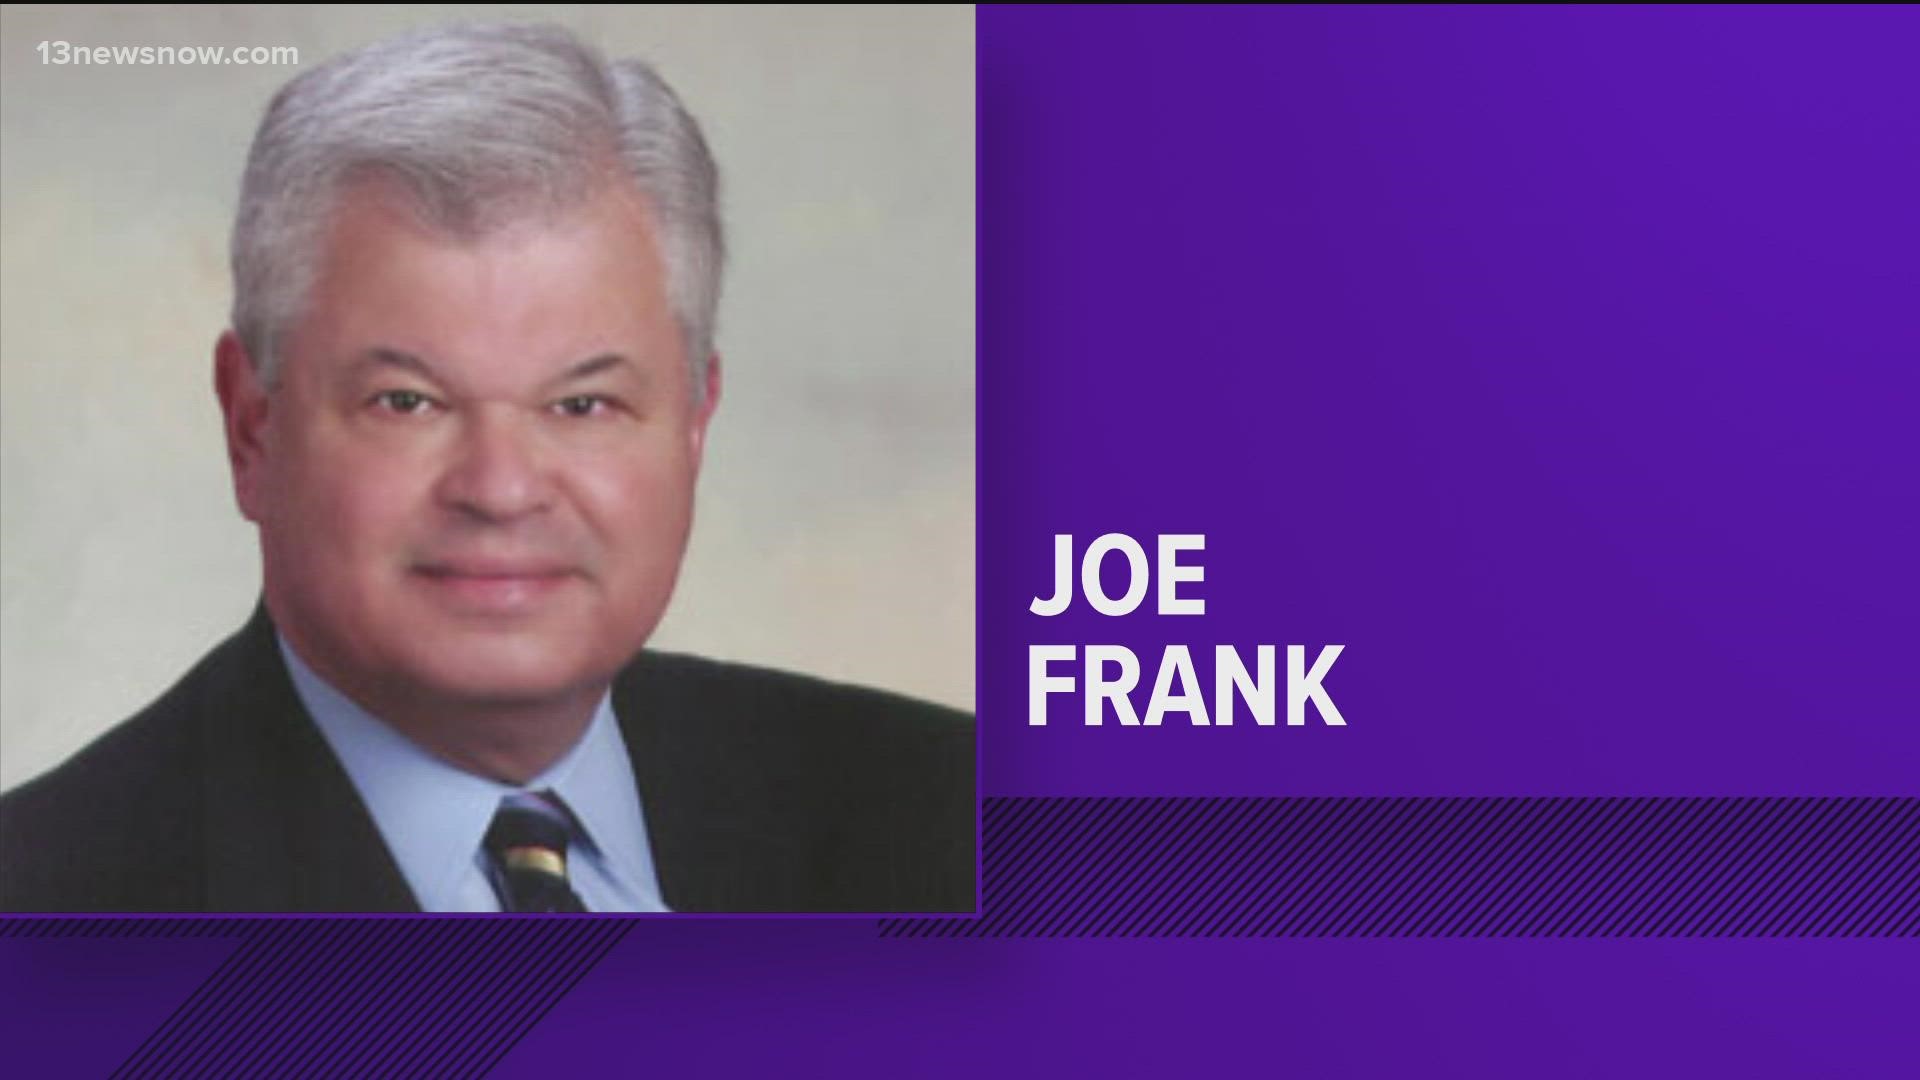 Former Newport News Mayor and lawyer Joe Frank has died, the city confirmed.